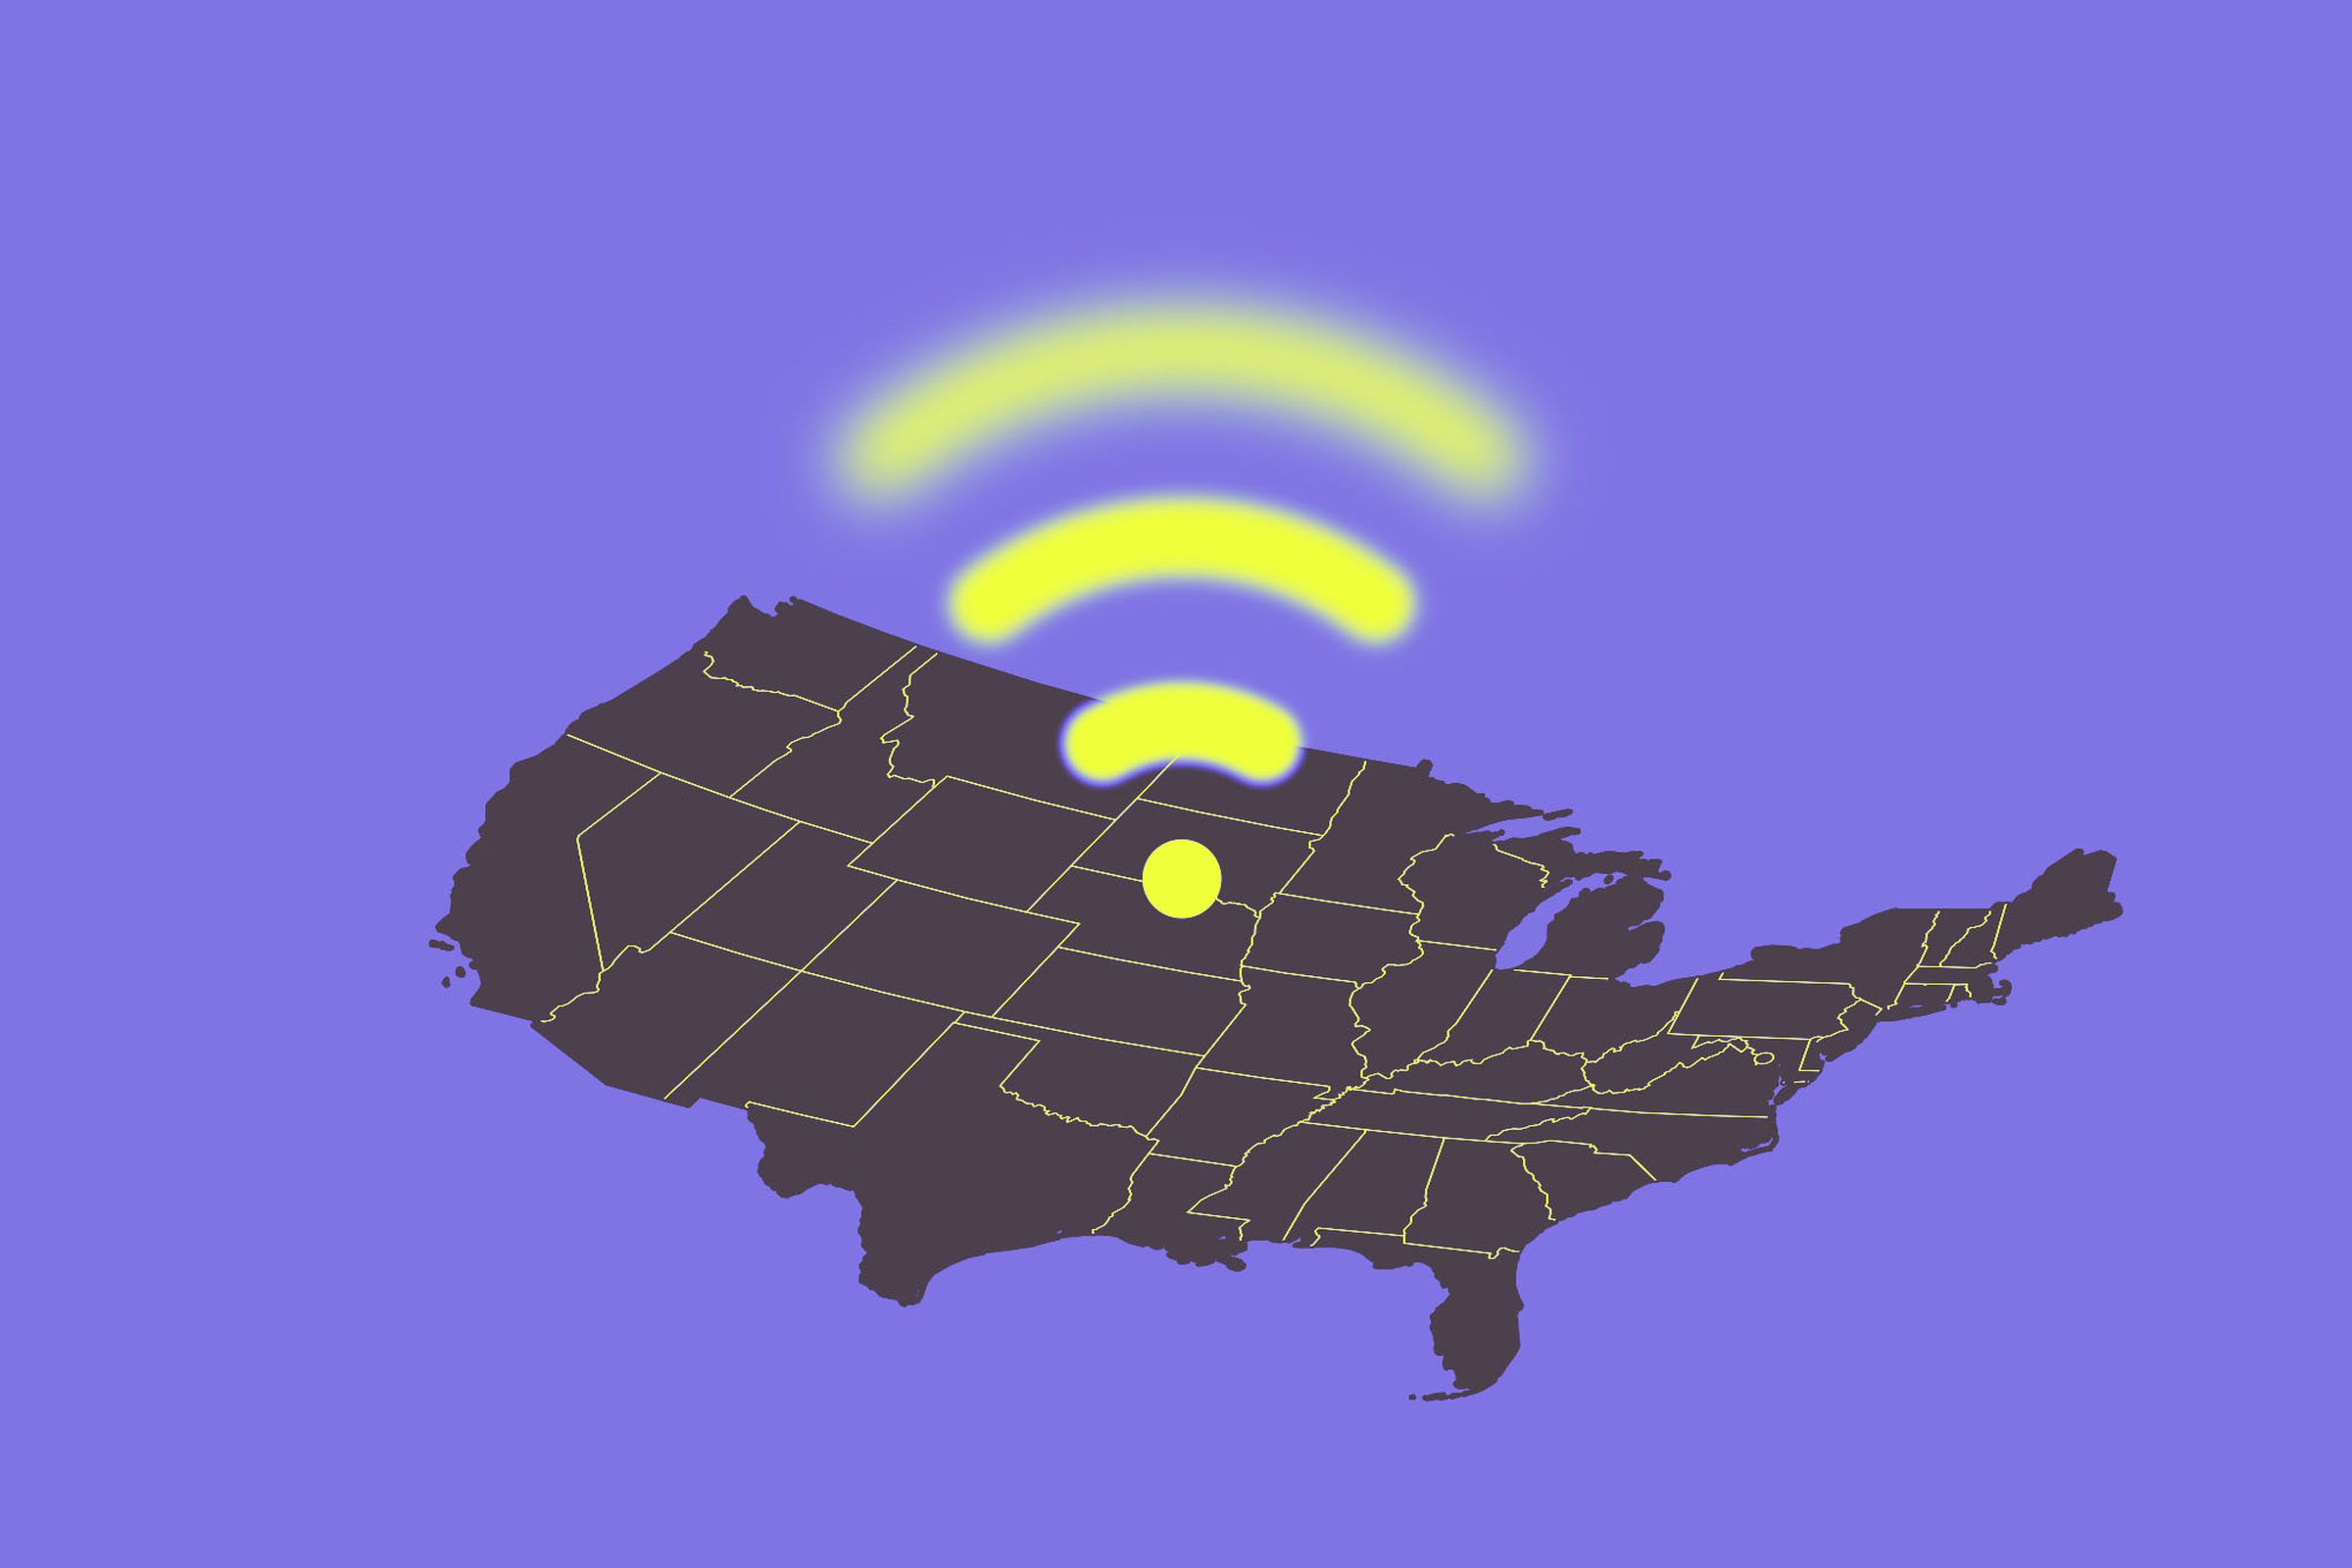 A fading Wi-Fi symbol above the United States.